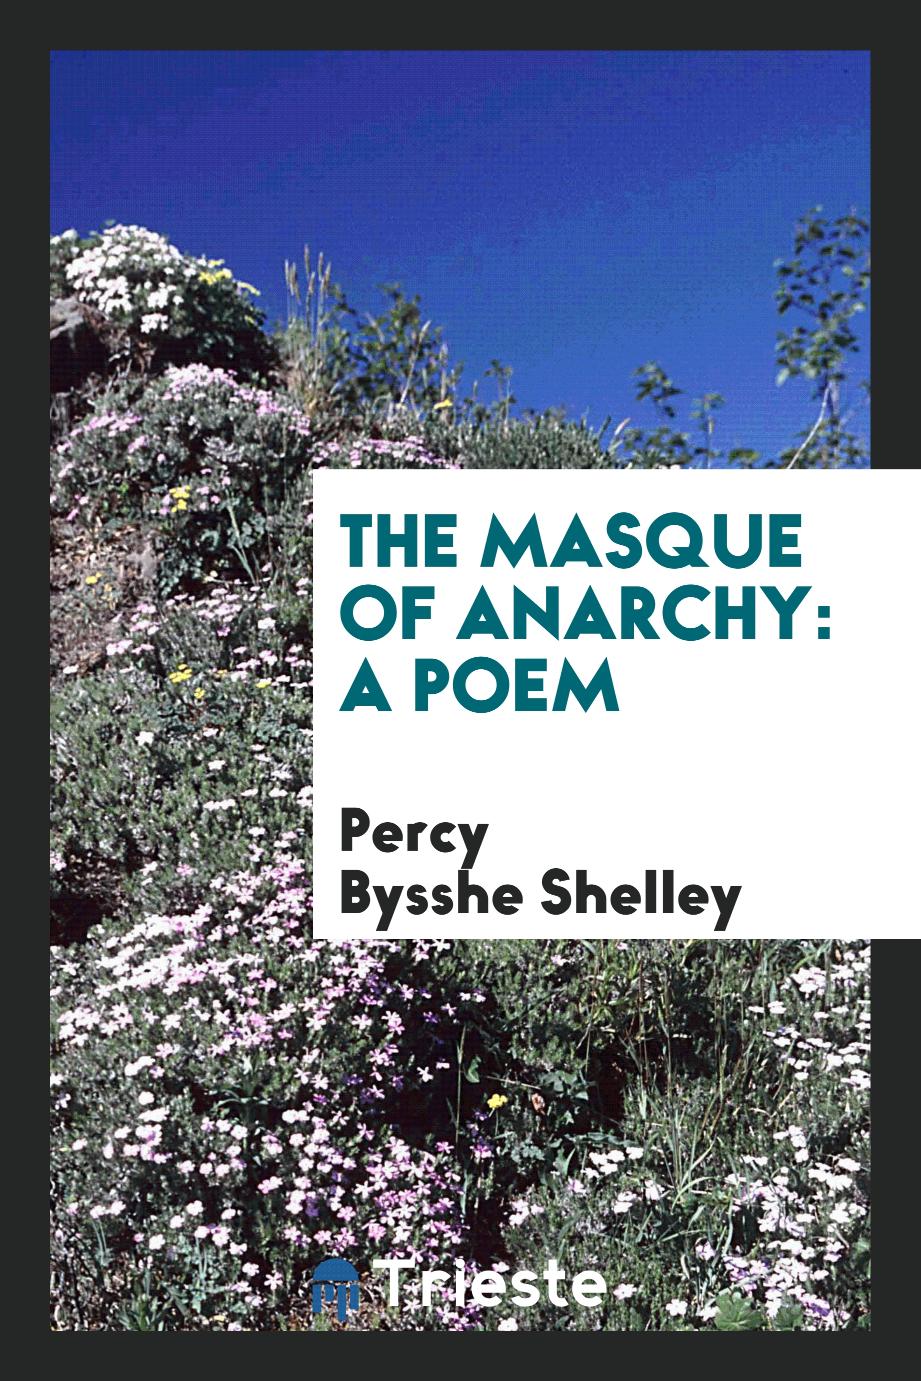 The masque of anarchy: A poem